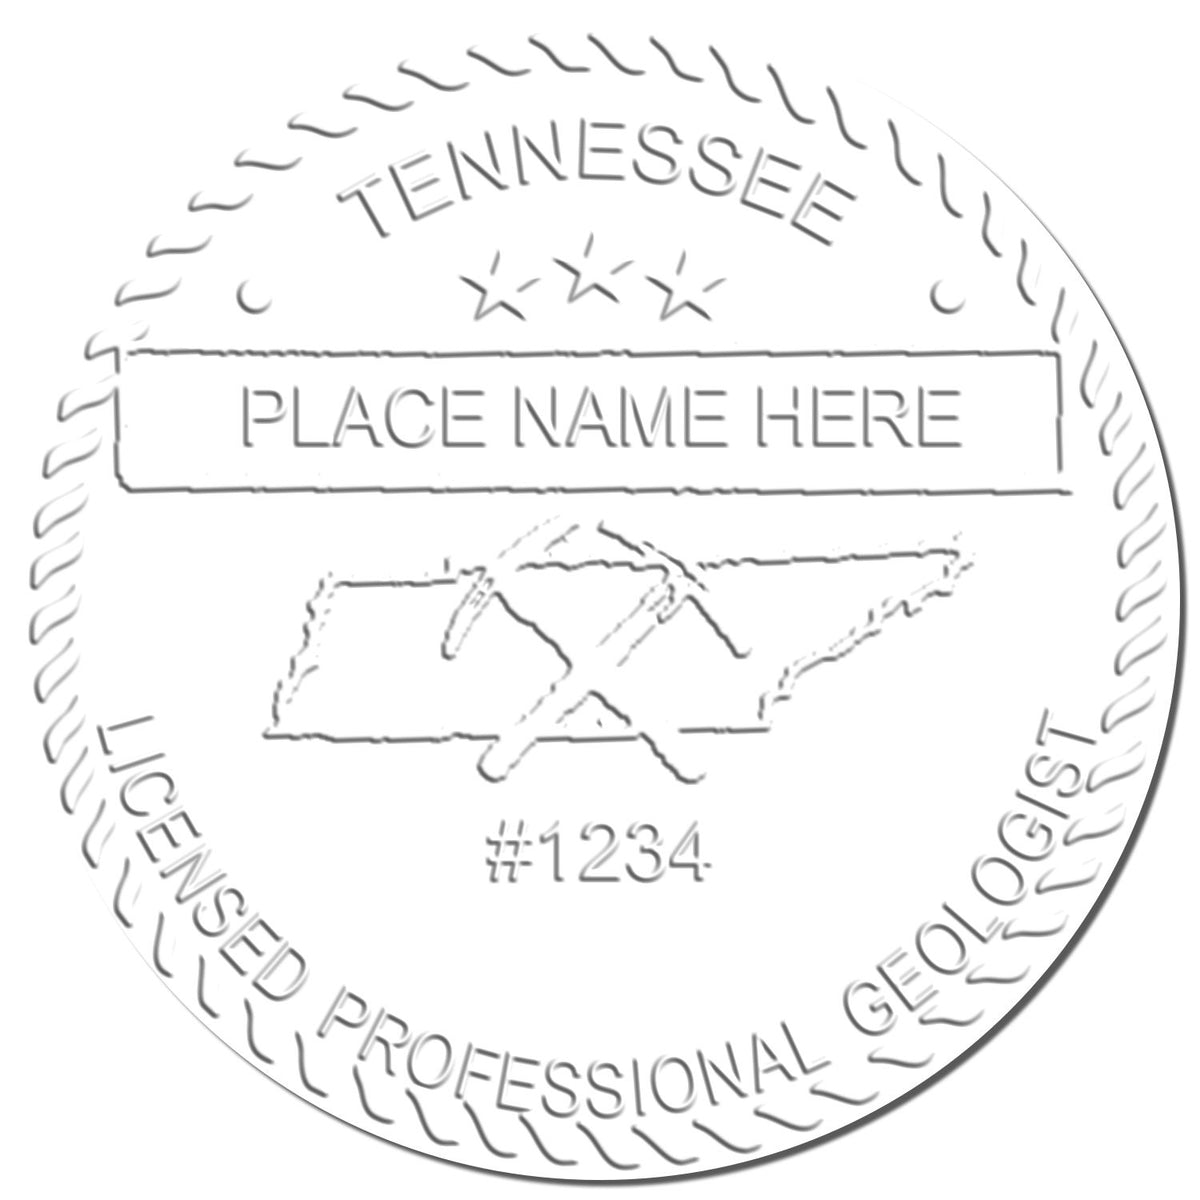 A photograph of the Hybrid Tennessee Geologist Seal stamp impression reveals a vivid, professional image of the on paper.